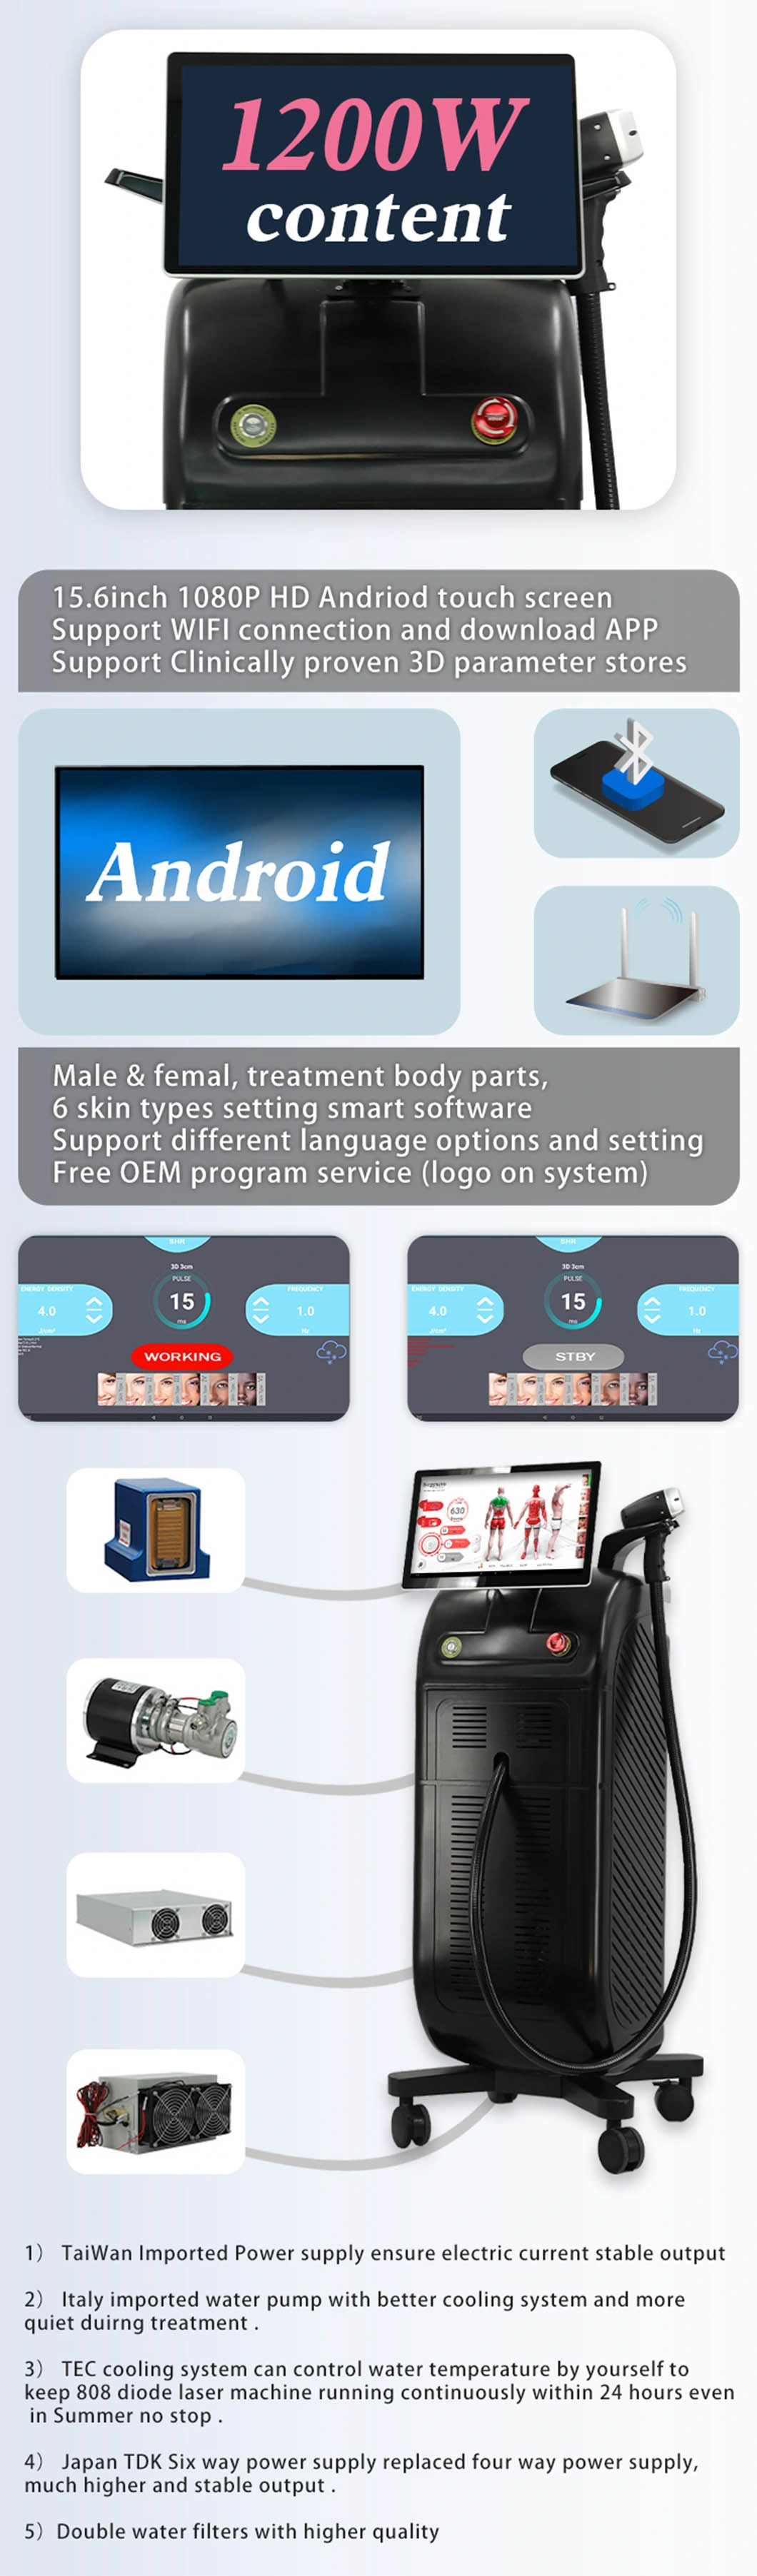 2022 New Long Pulsed ND YAG 755 Device for Opt China Laser Hair Removal 755+808+1604nm